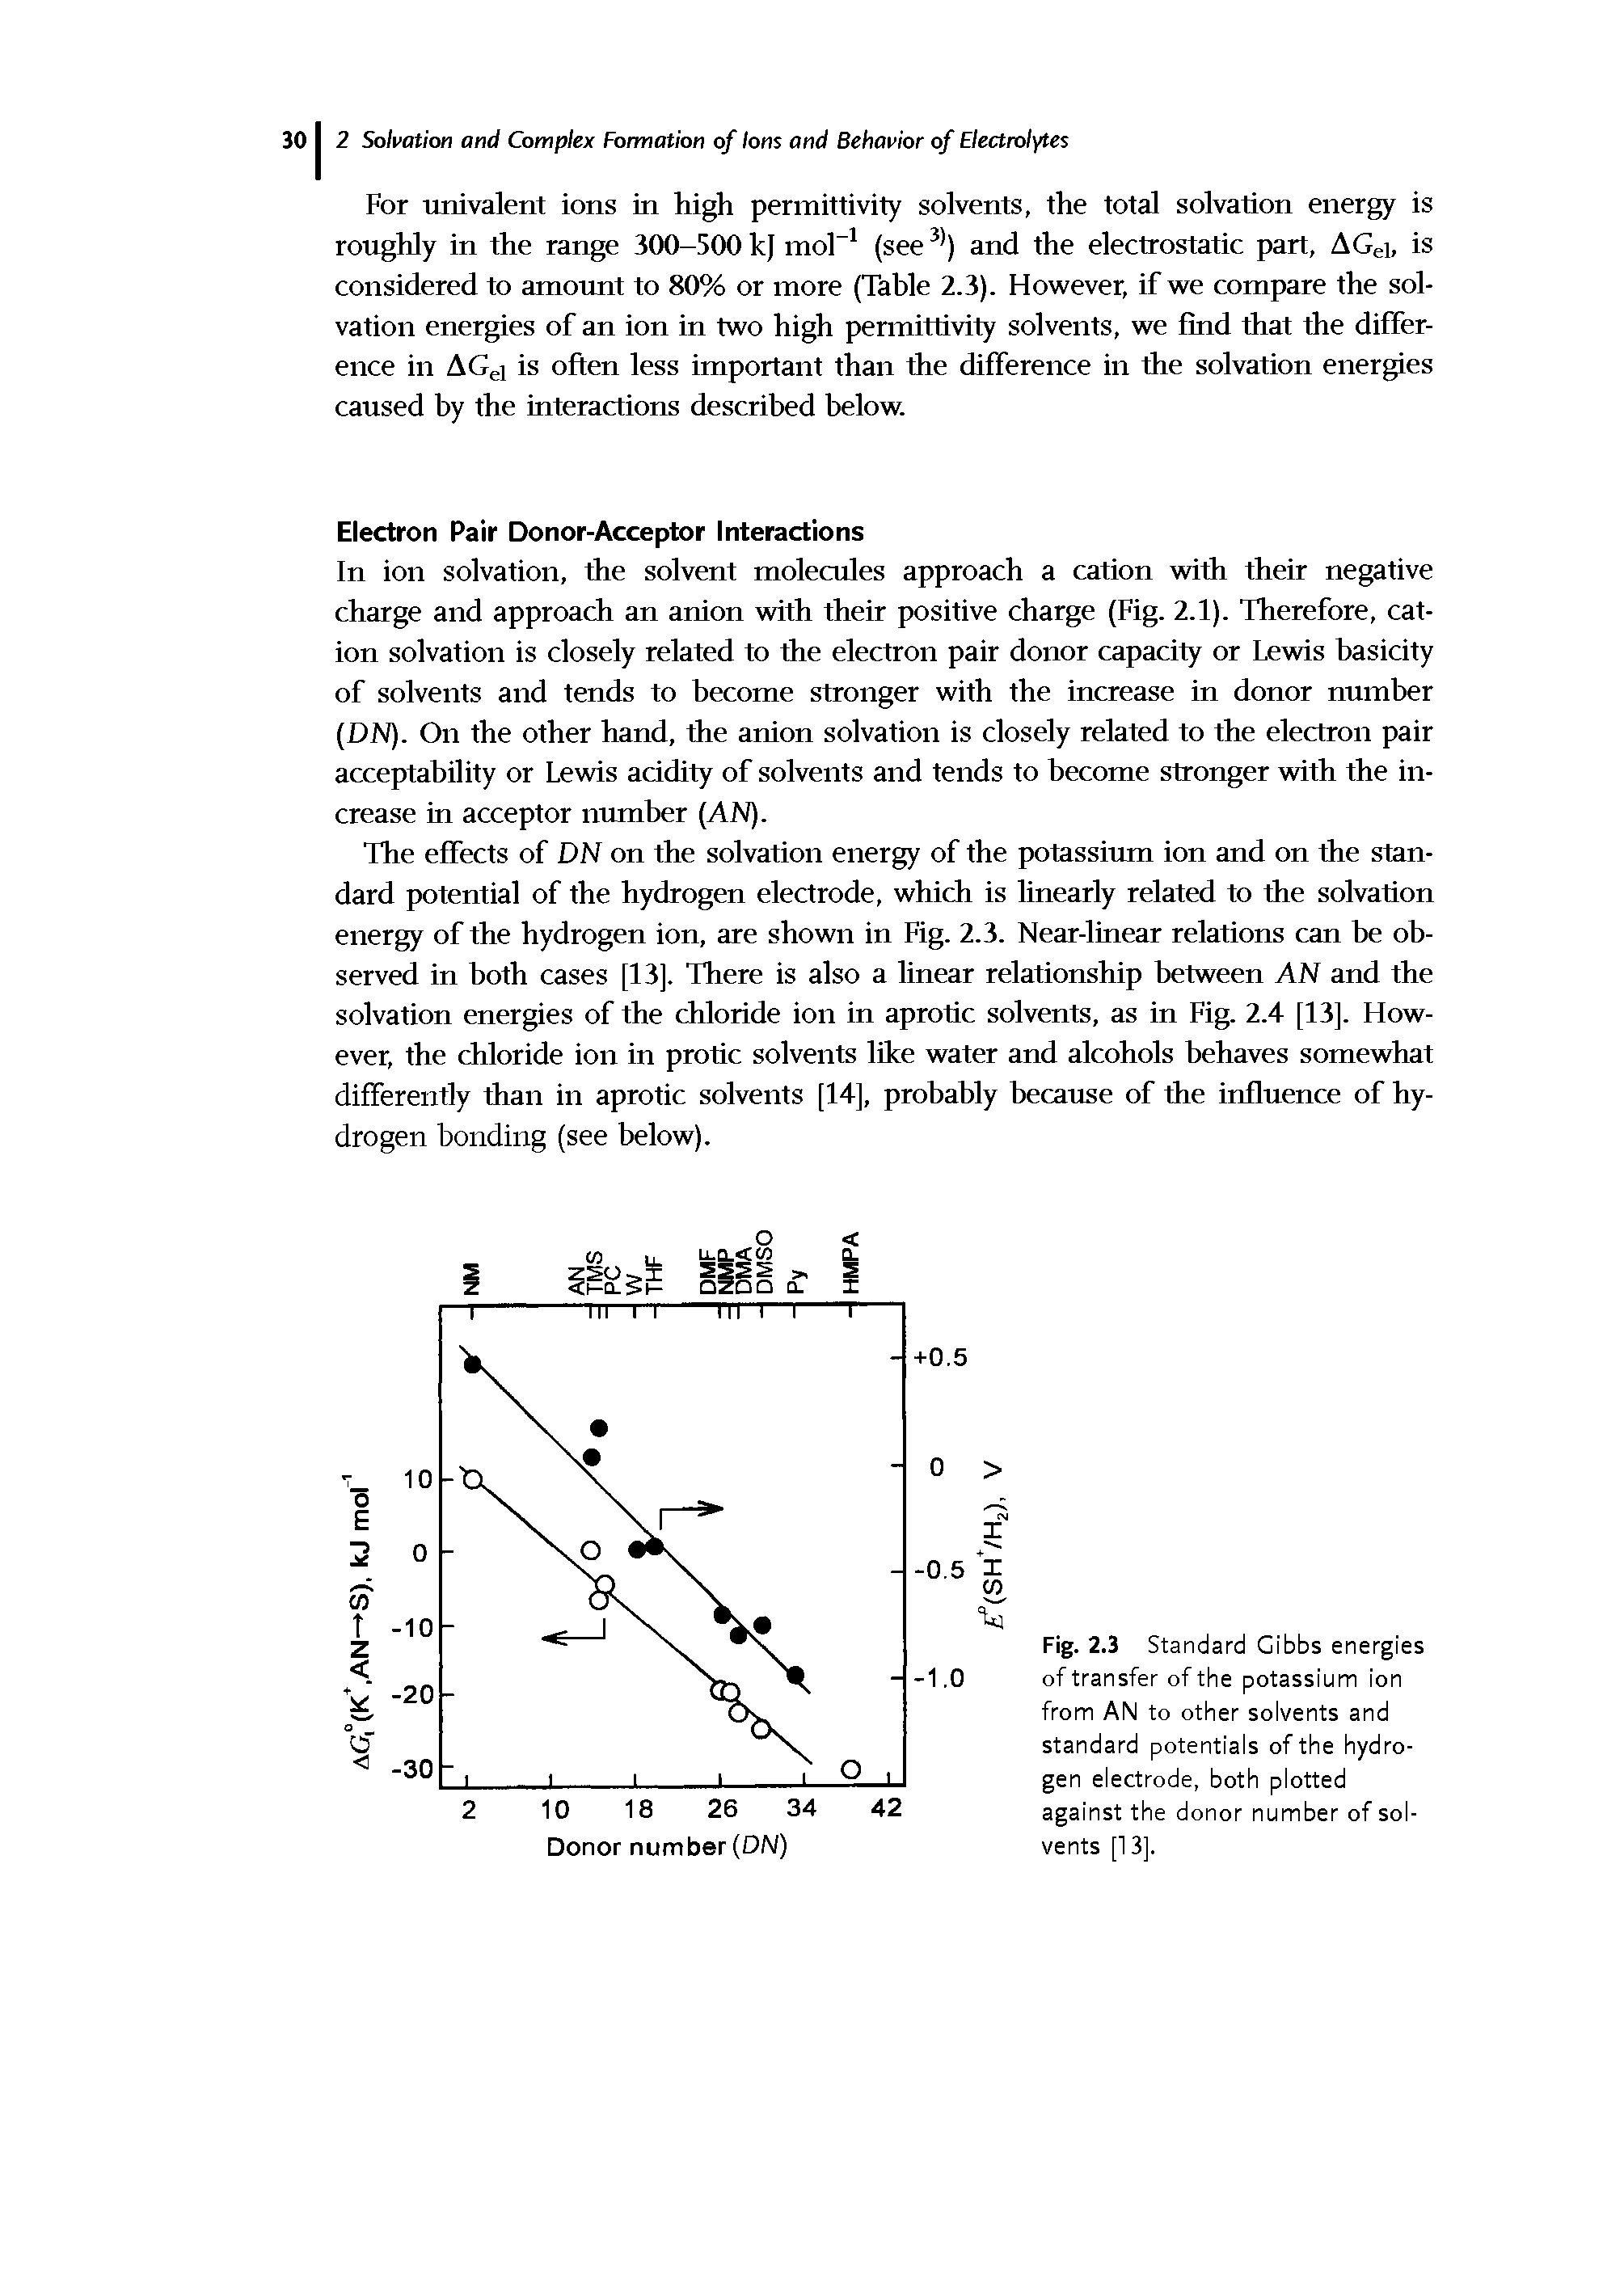 Fig. 2.3 Standard Gibbs energies of transfer of the potassium ion from AN to other solvents and standard potentials of the hydrogen electrode, both plotted against the donor number of solvents [13].